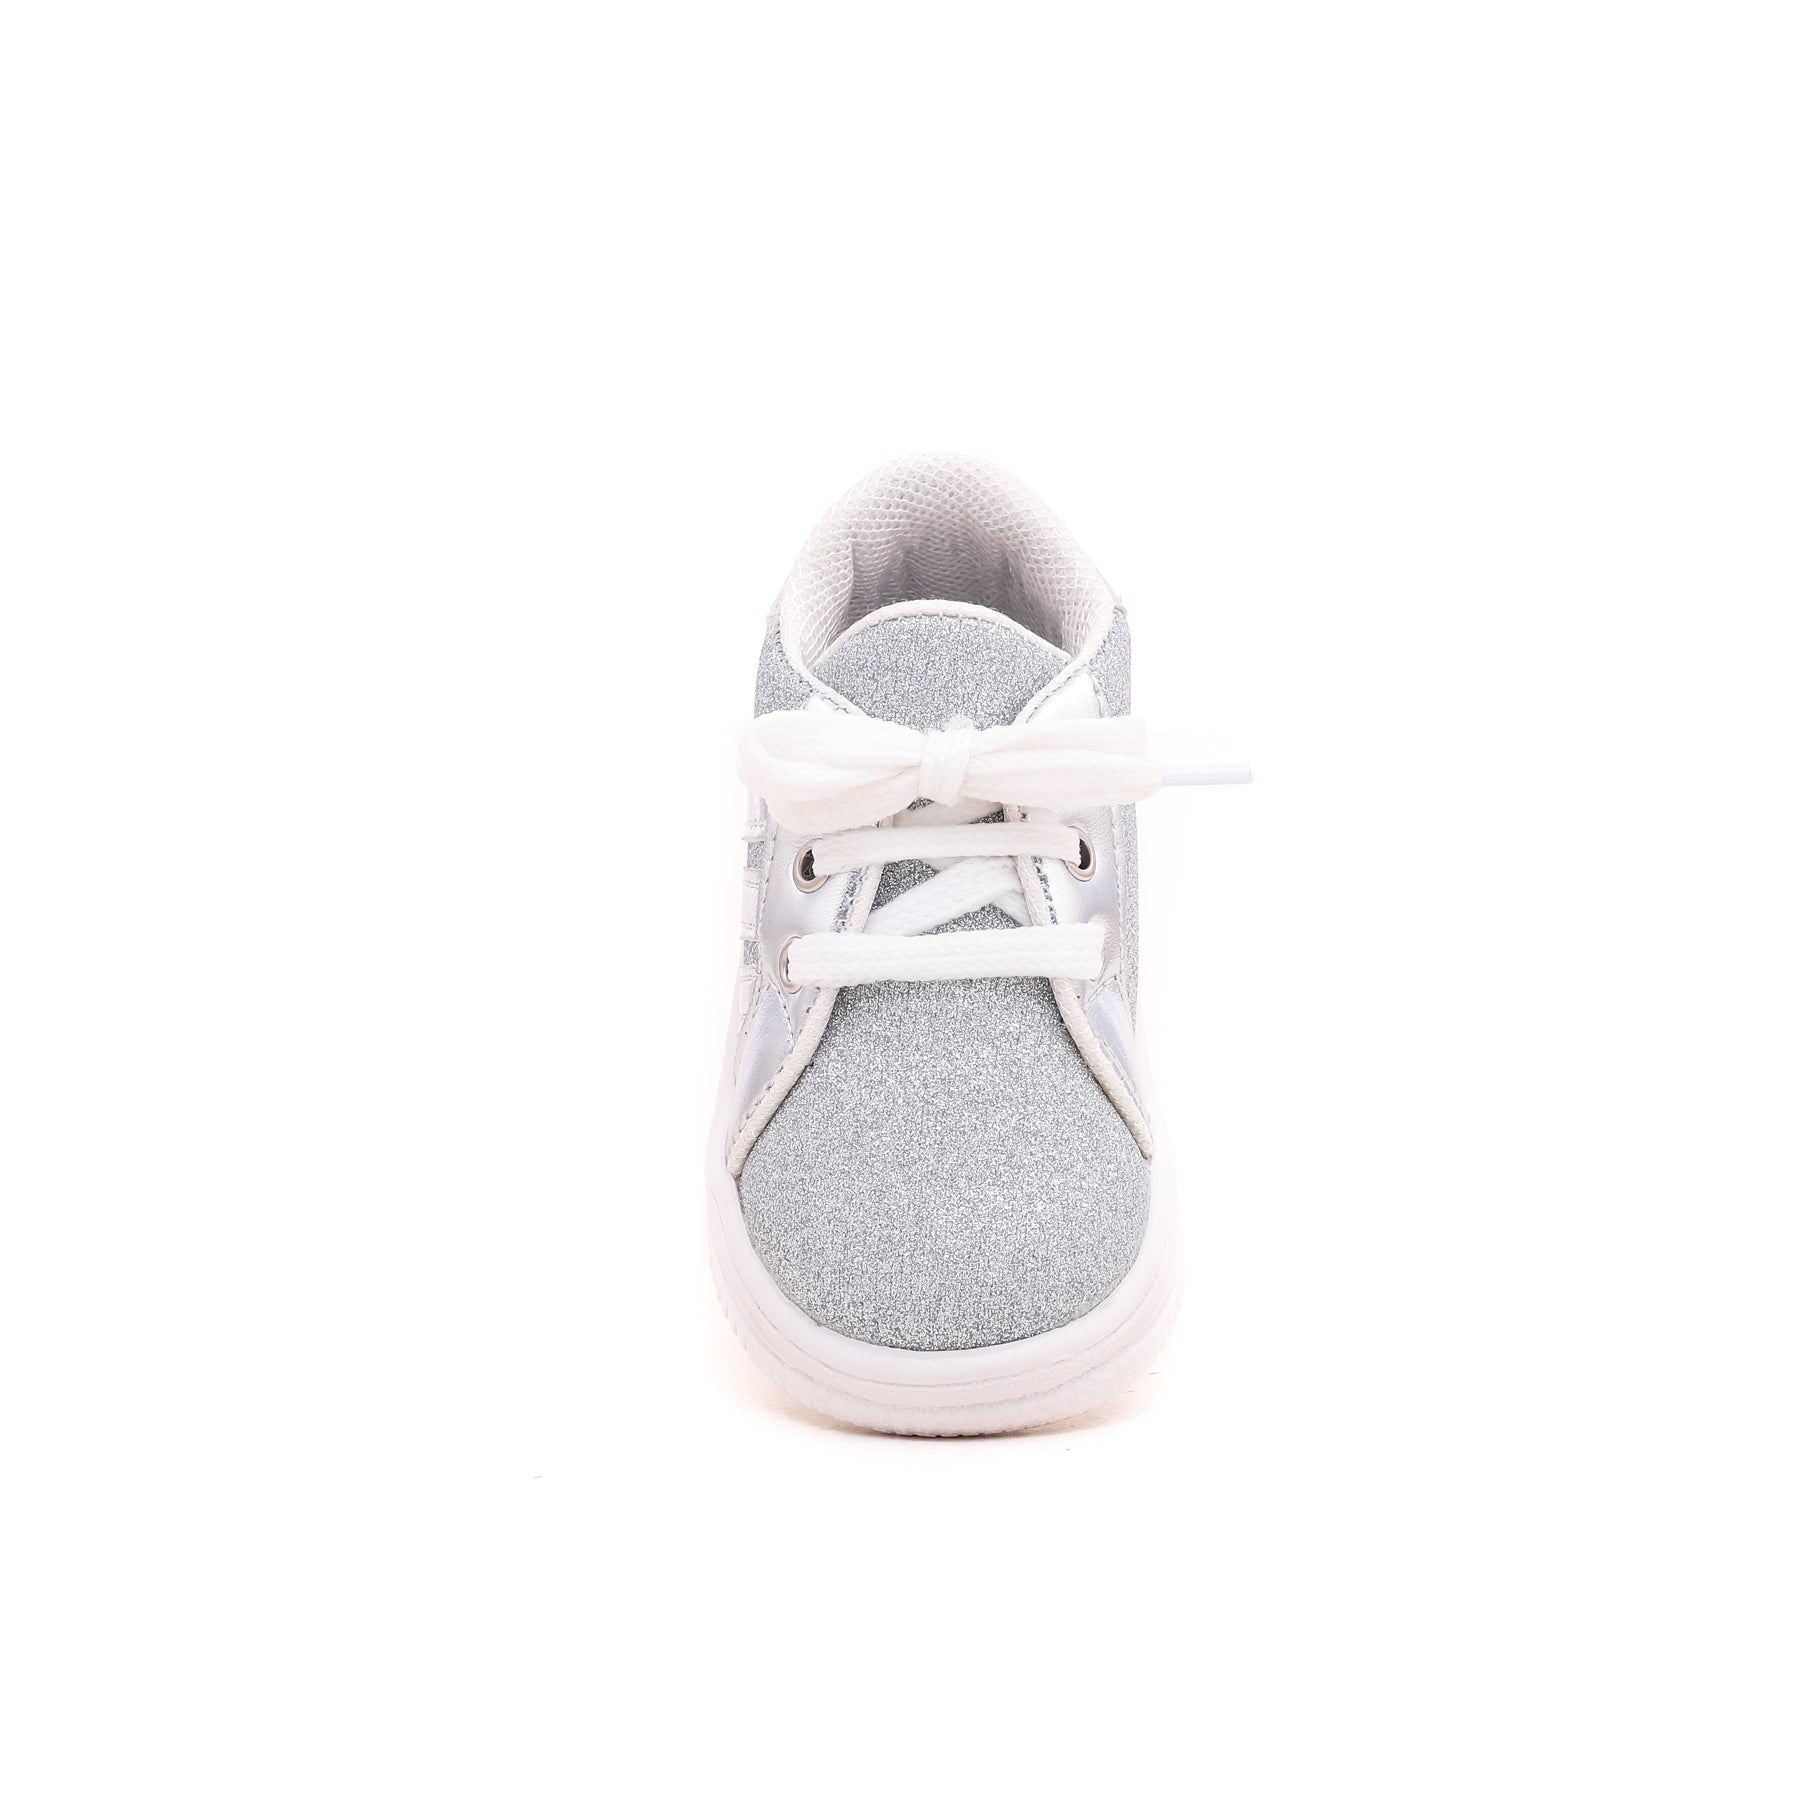 Babies Silver Casual Booties KD7736